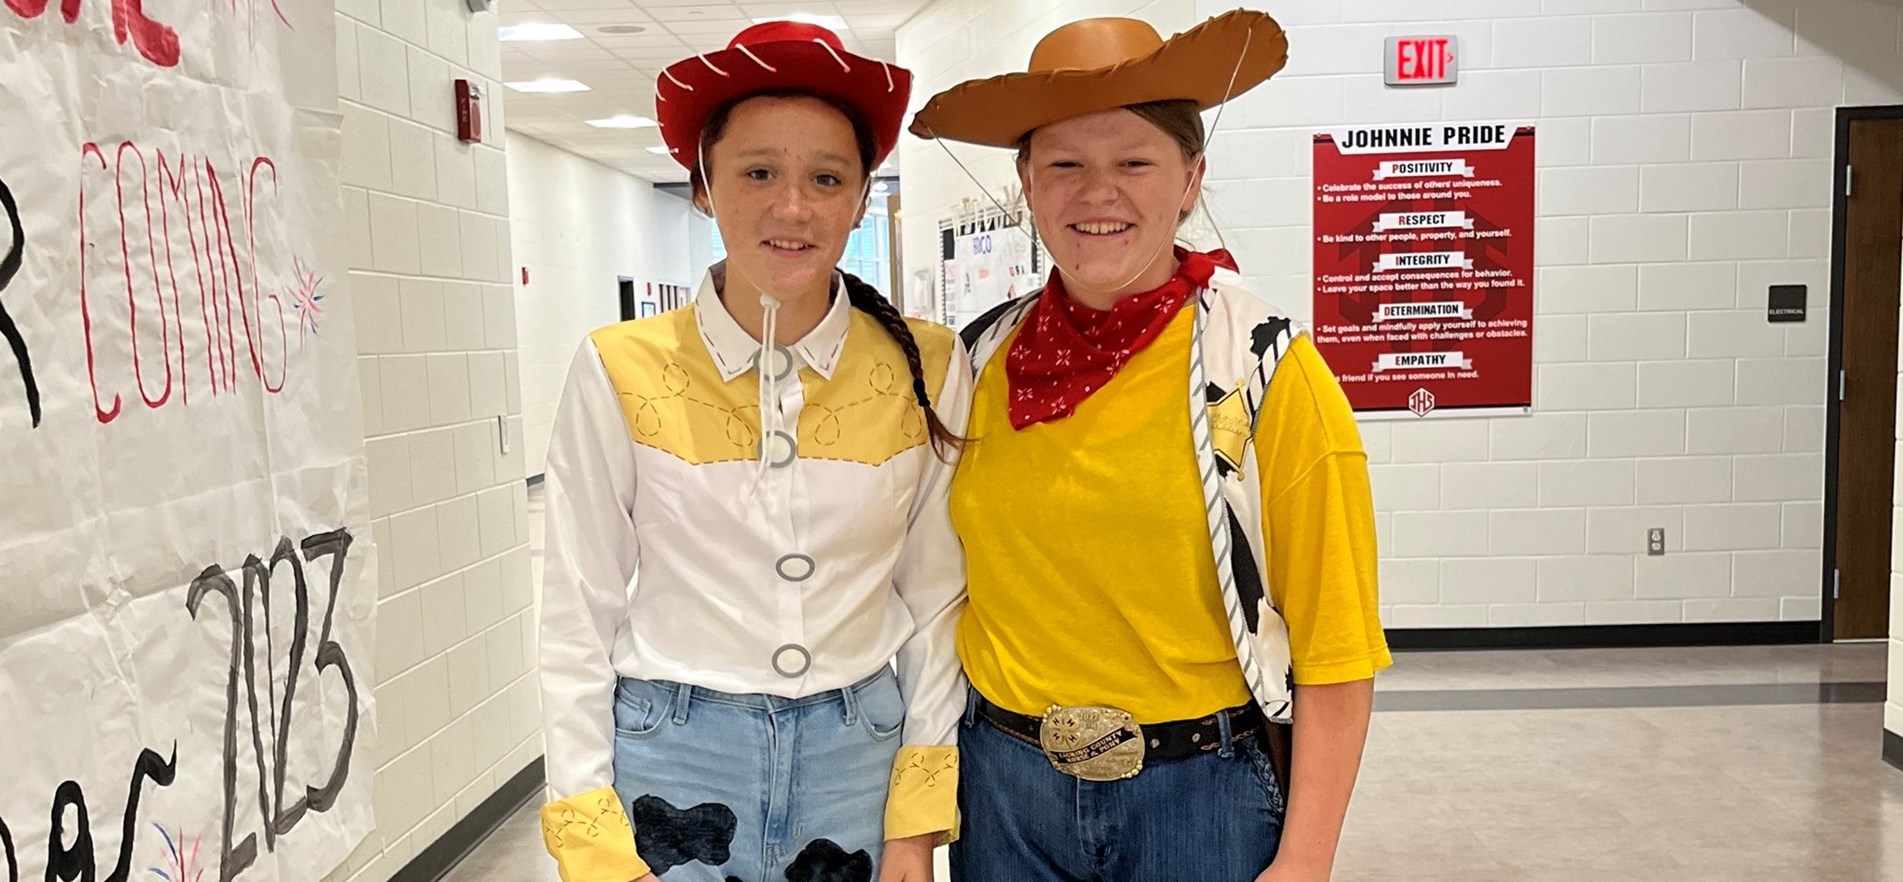 Students standing in high school hallway dressed as Toy Story characters for Iconic Duo spirit week theme day